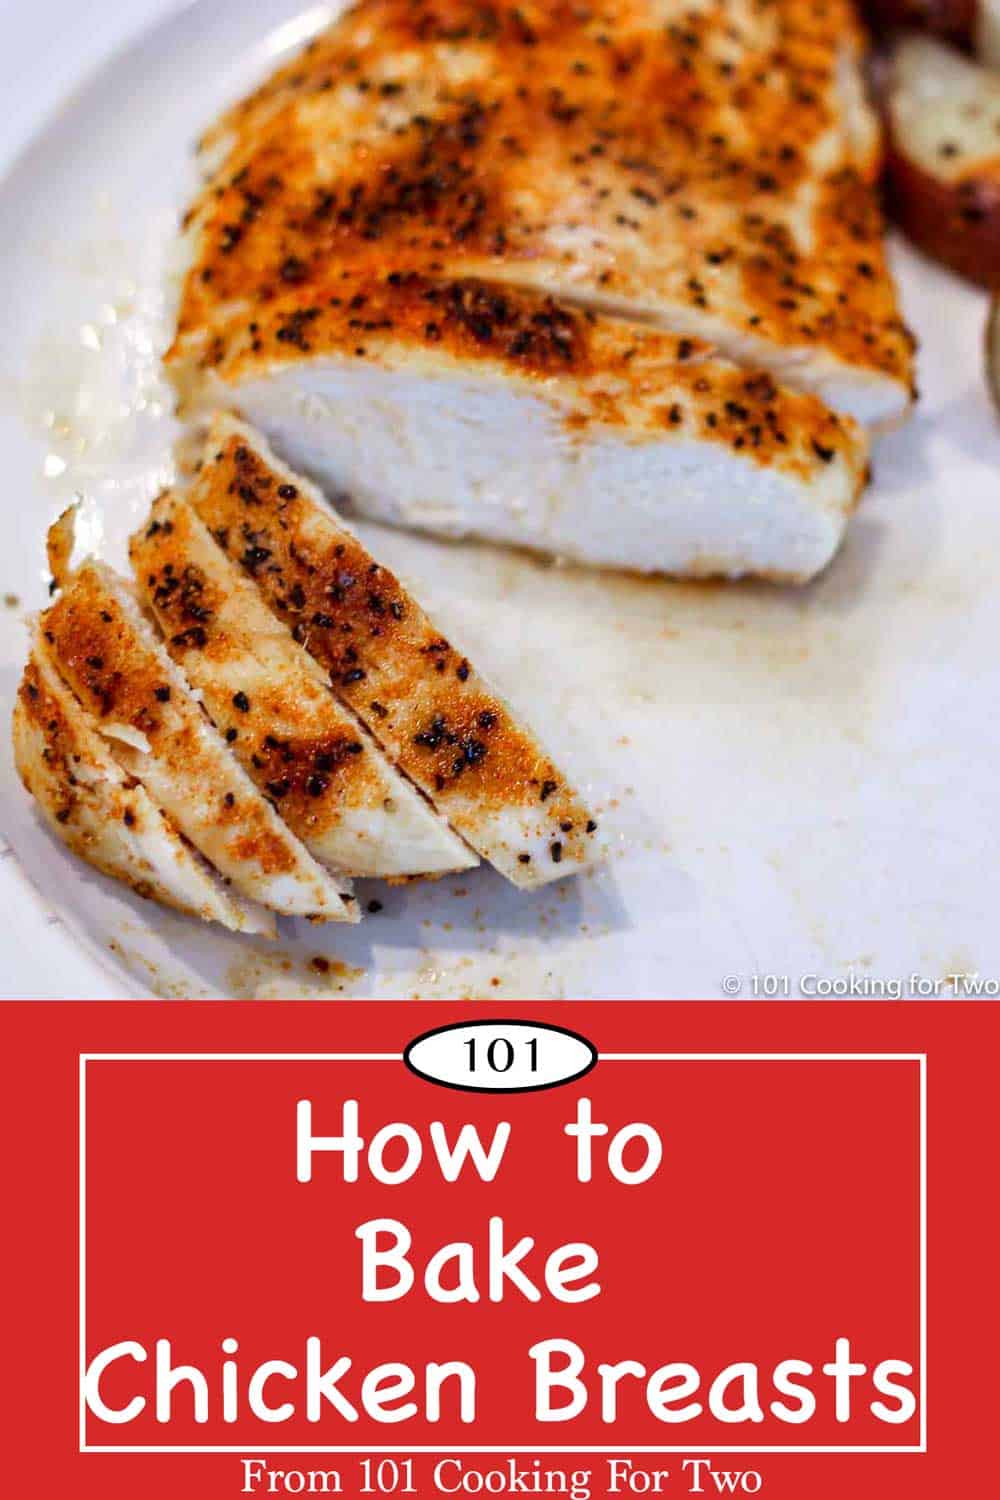 Baked Chicken Breasts 101 Cooking For Two